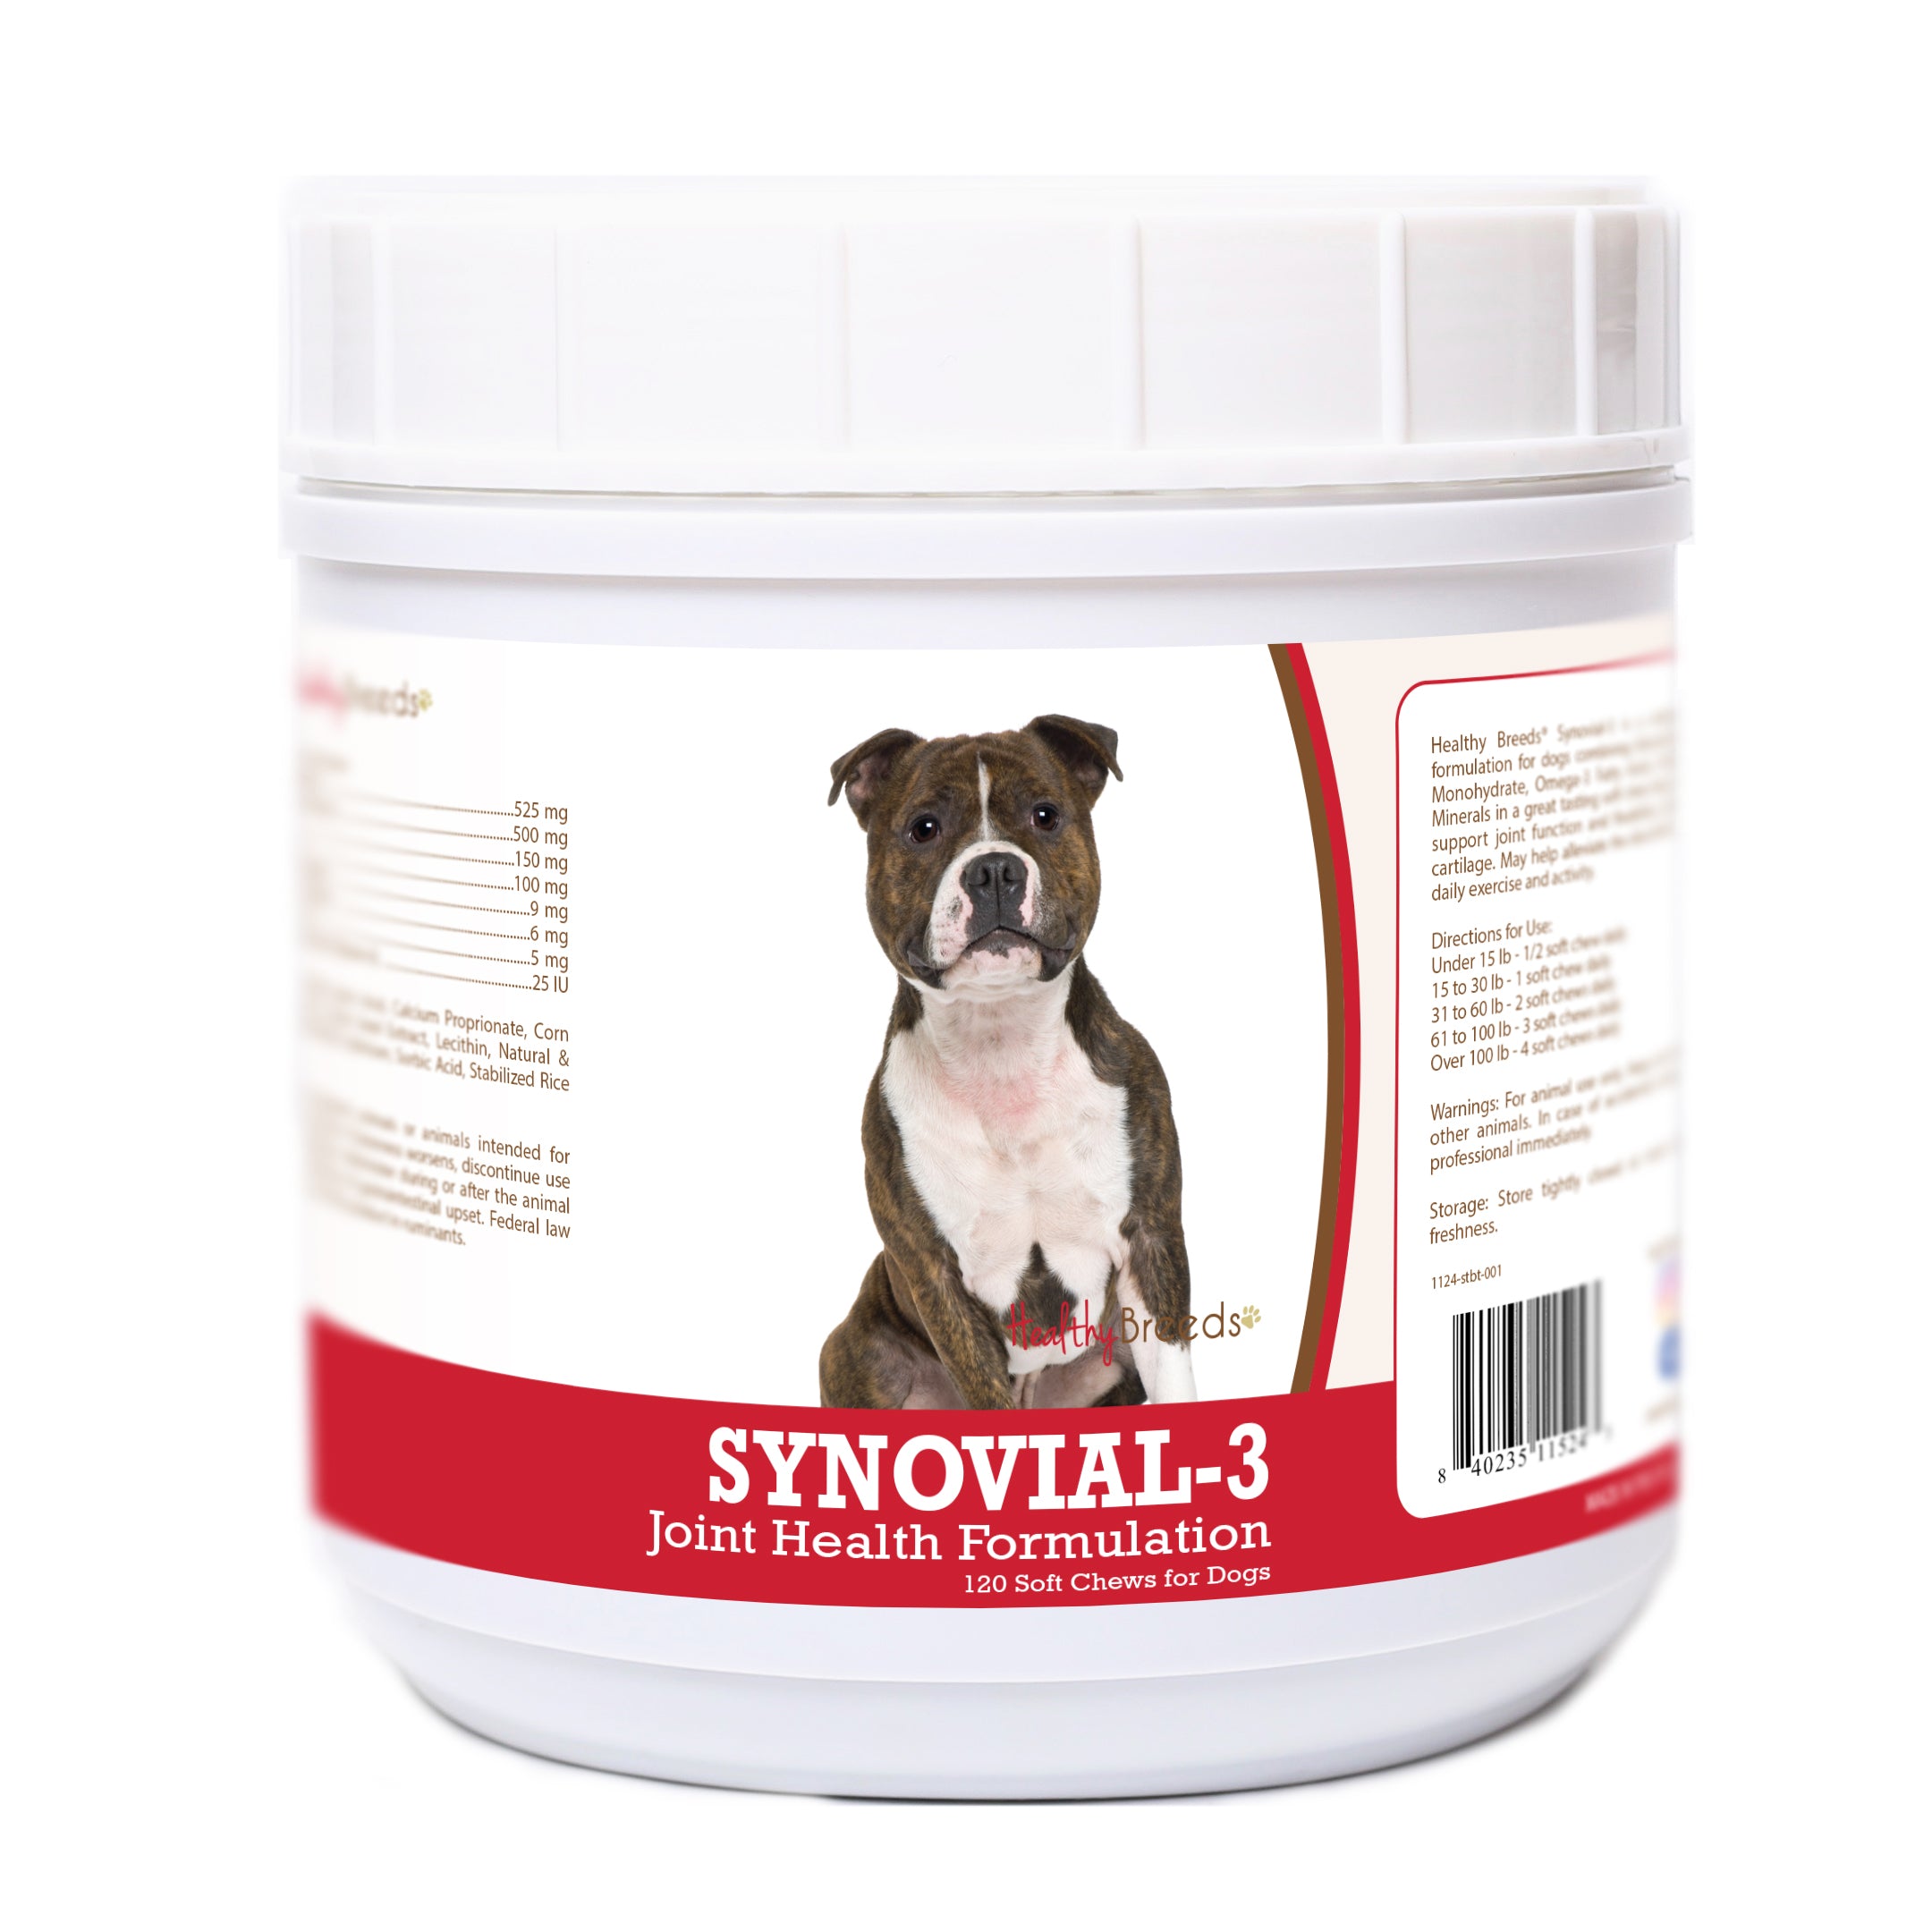 Staffordshire Bull Terrier Synovial-3 Joint Health Formulation Soft Chews 120 Count